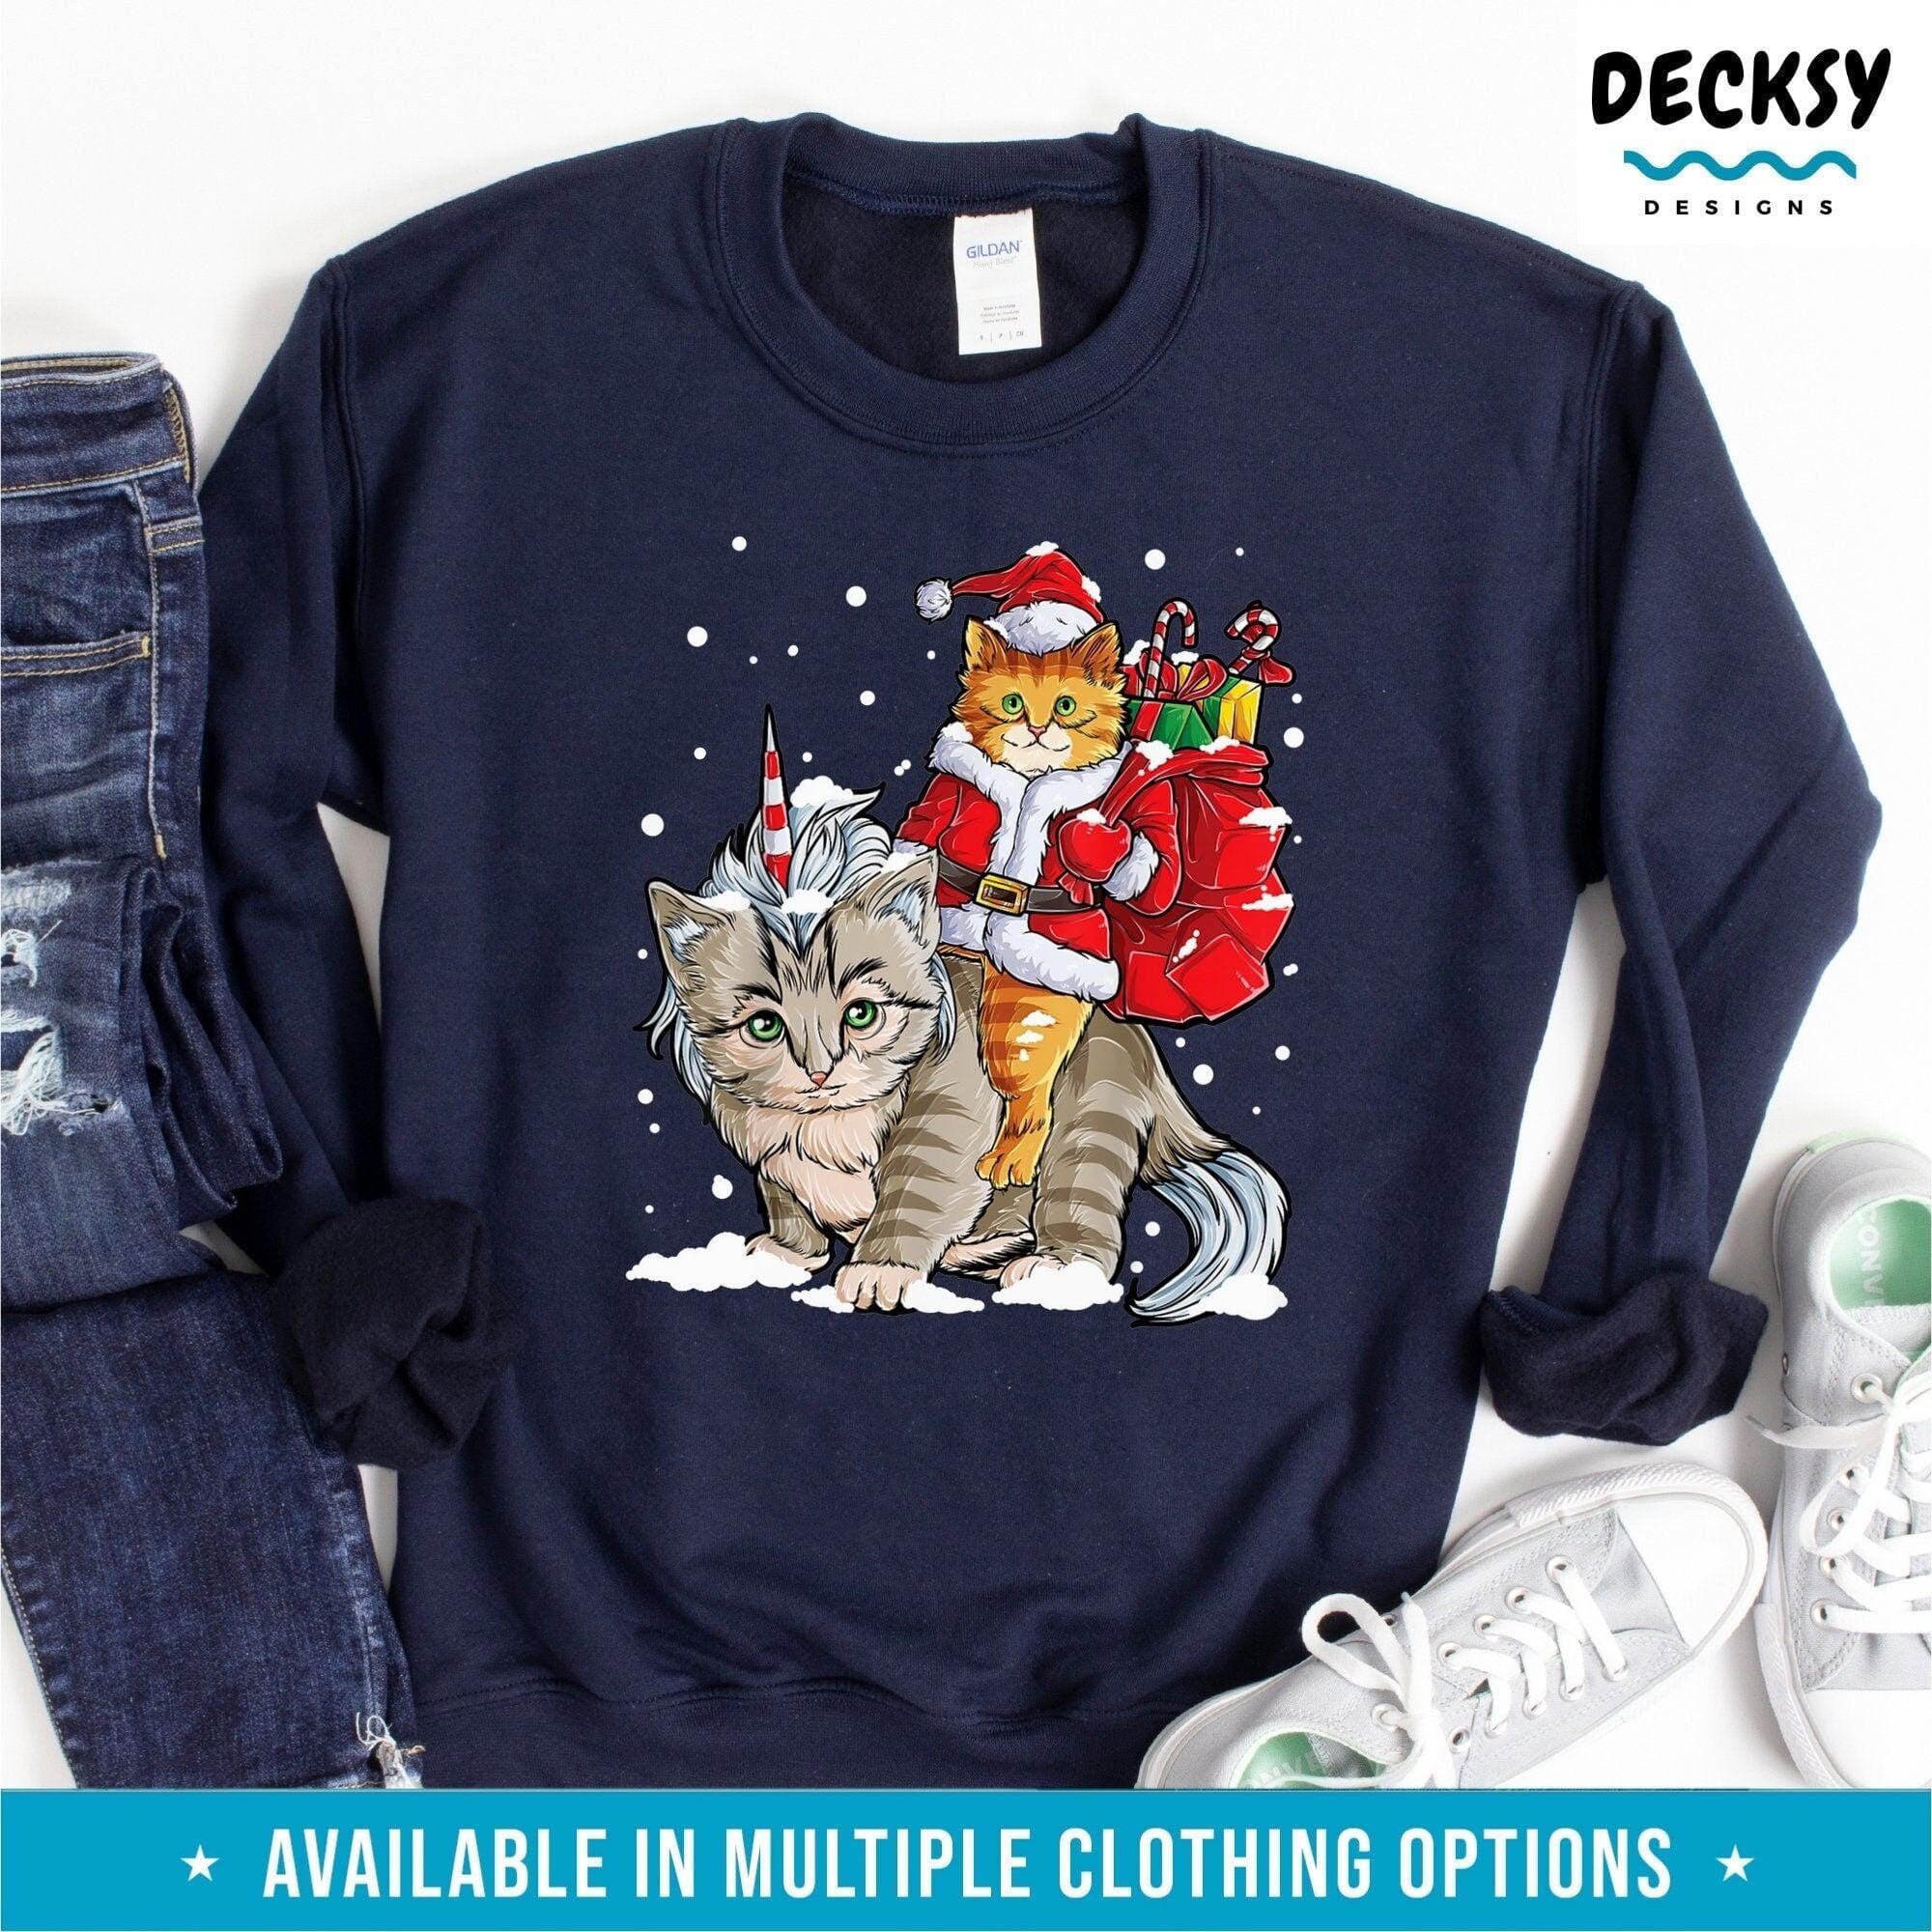 Cat Christmas Tshirt, Xmas Gift for Cat Lover, Santa Cat Unicorn Tee-Clothing:Gender-Neutral Adult Clothing:Tops & Tees:T-shirts:Graphic Tees-DecksyDesigns